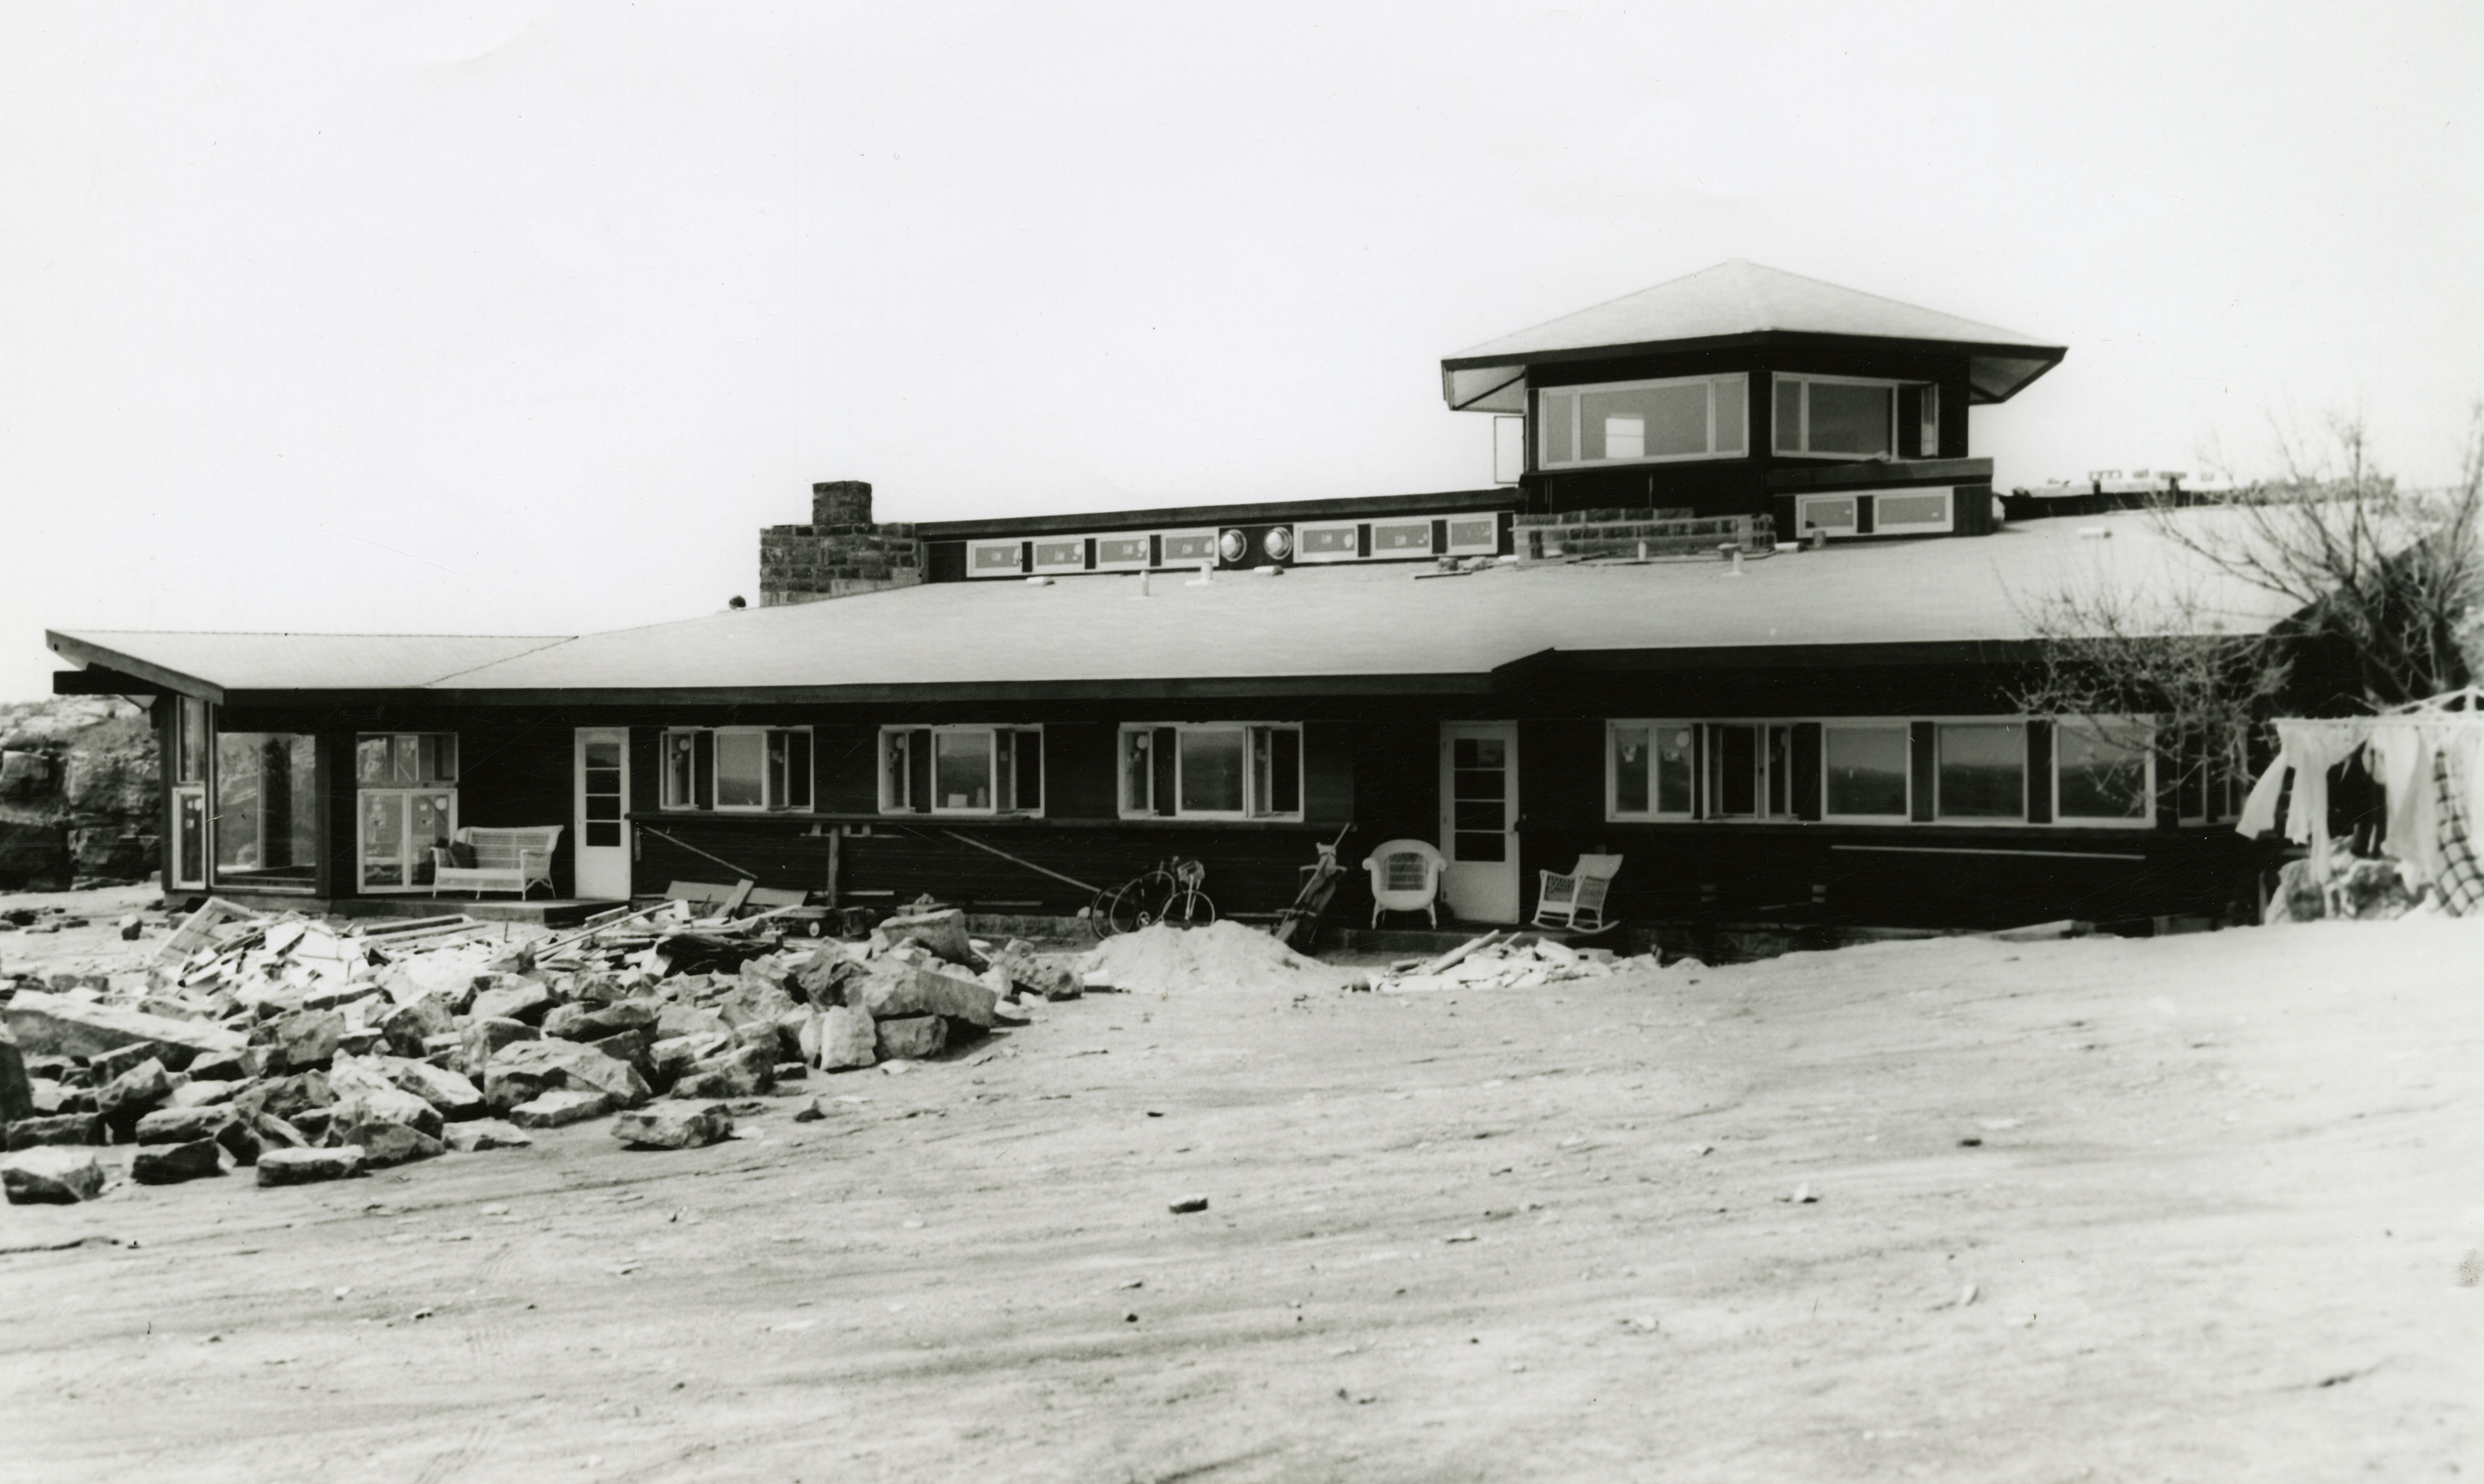 An outside view of the Manfred house just before completion.